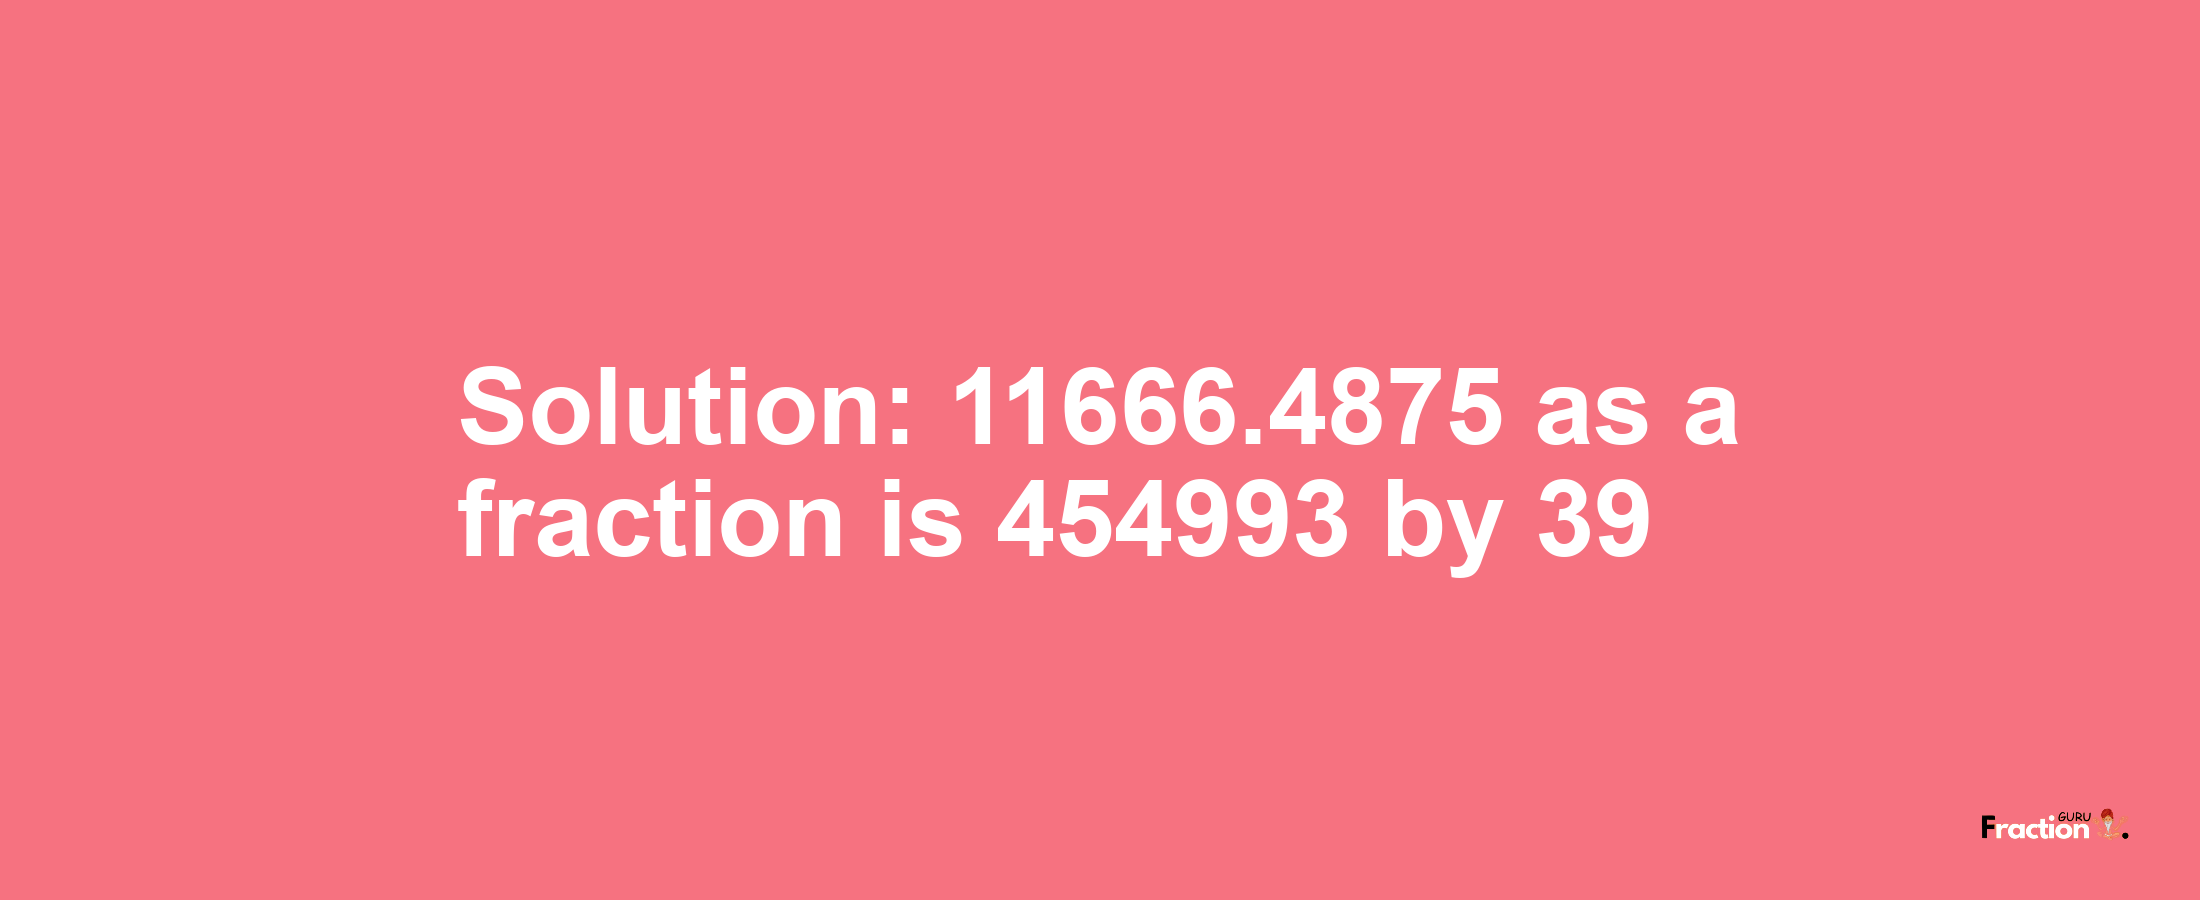 Solution:11666.4875 as a fraction is 454993/39